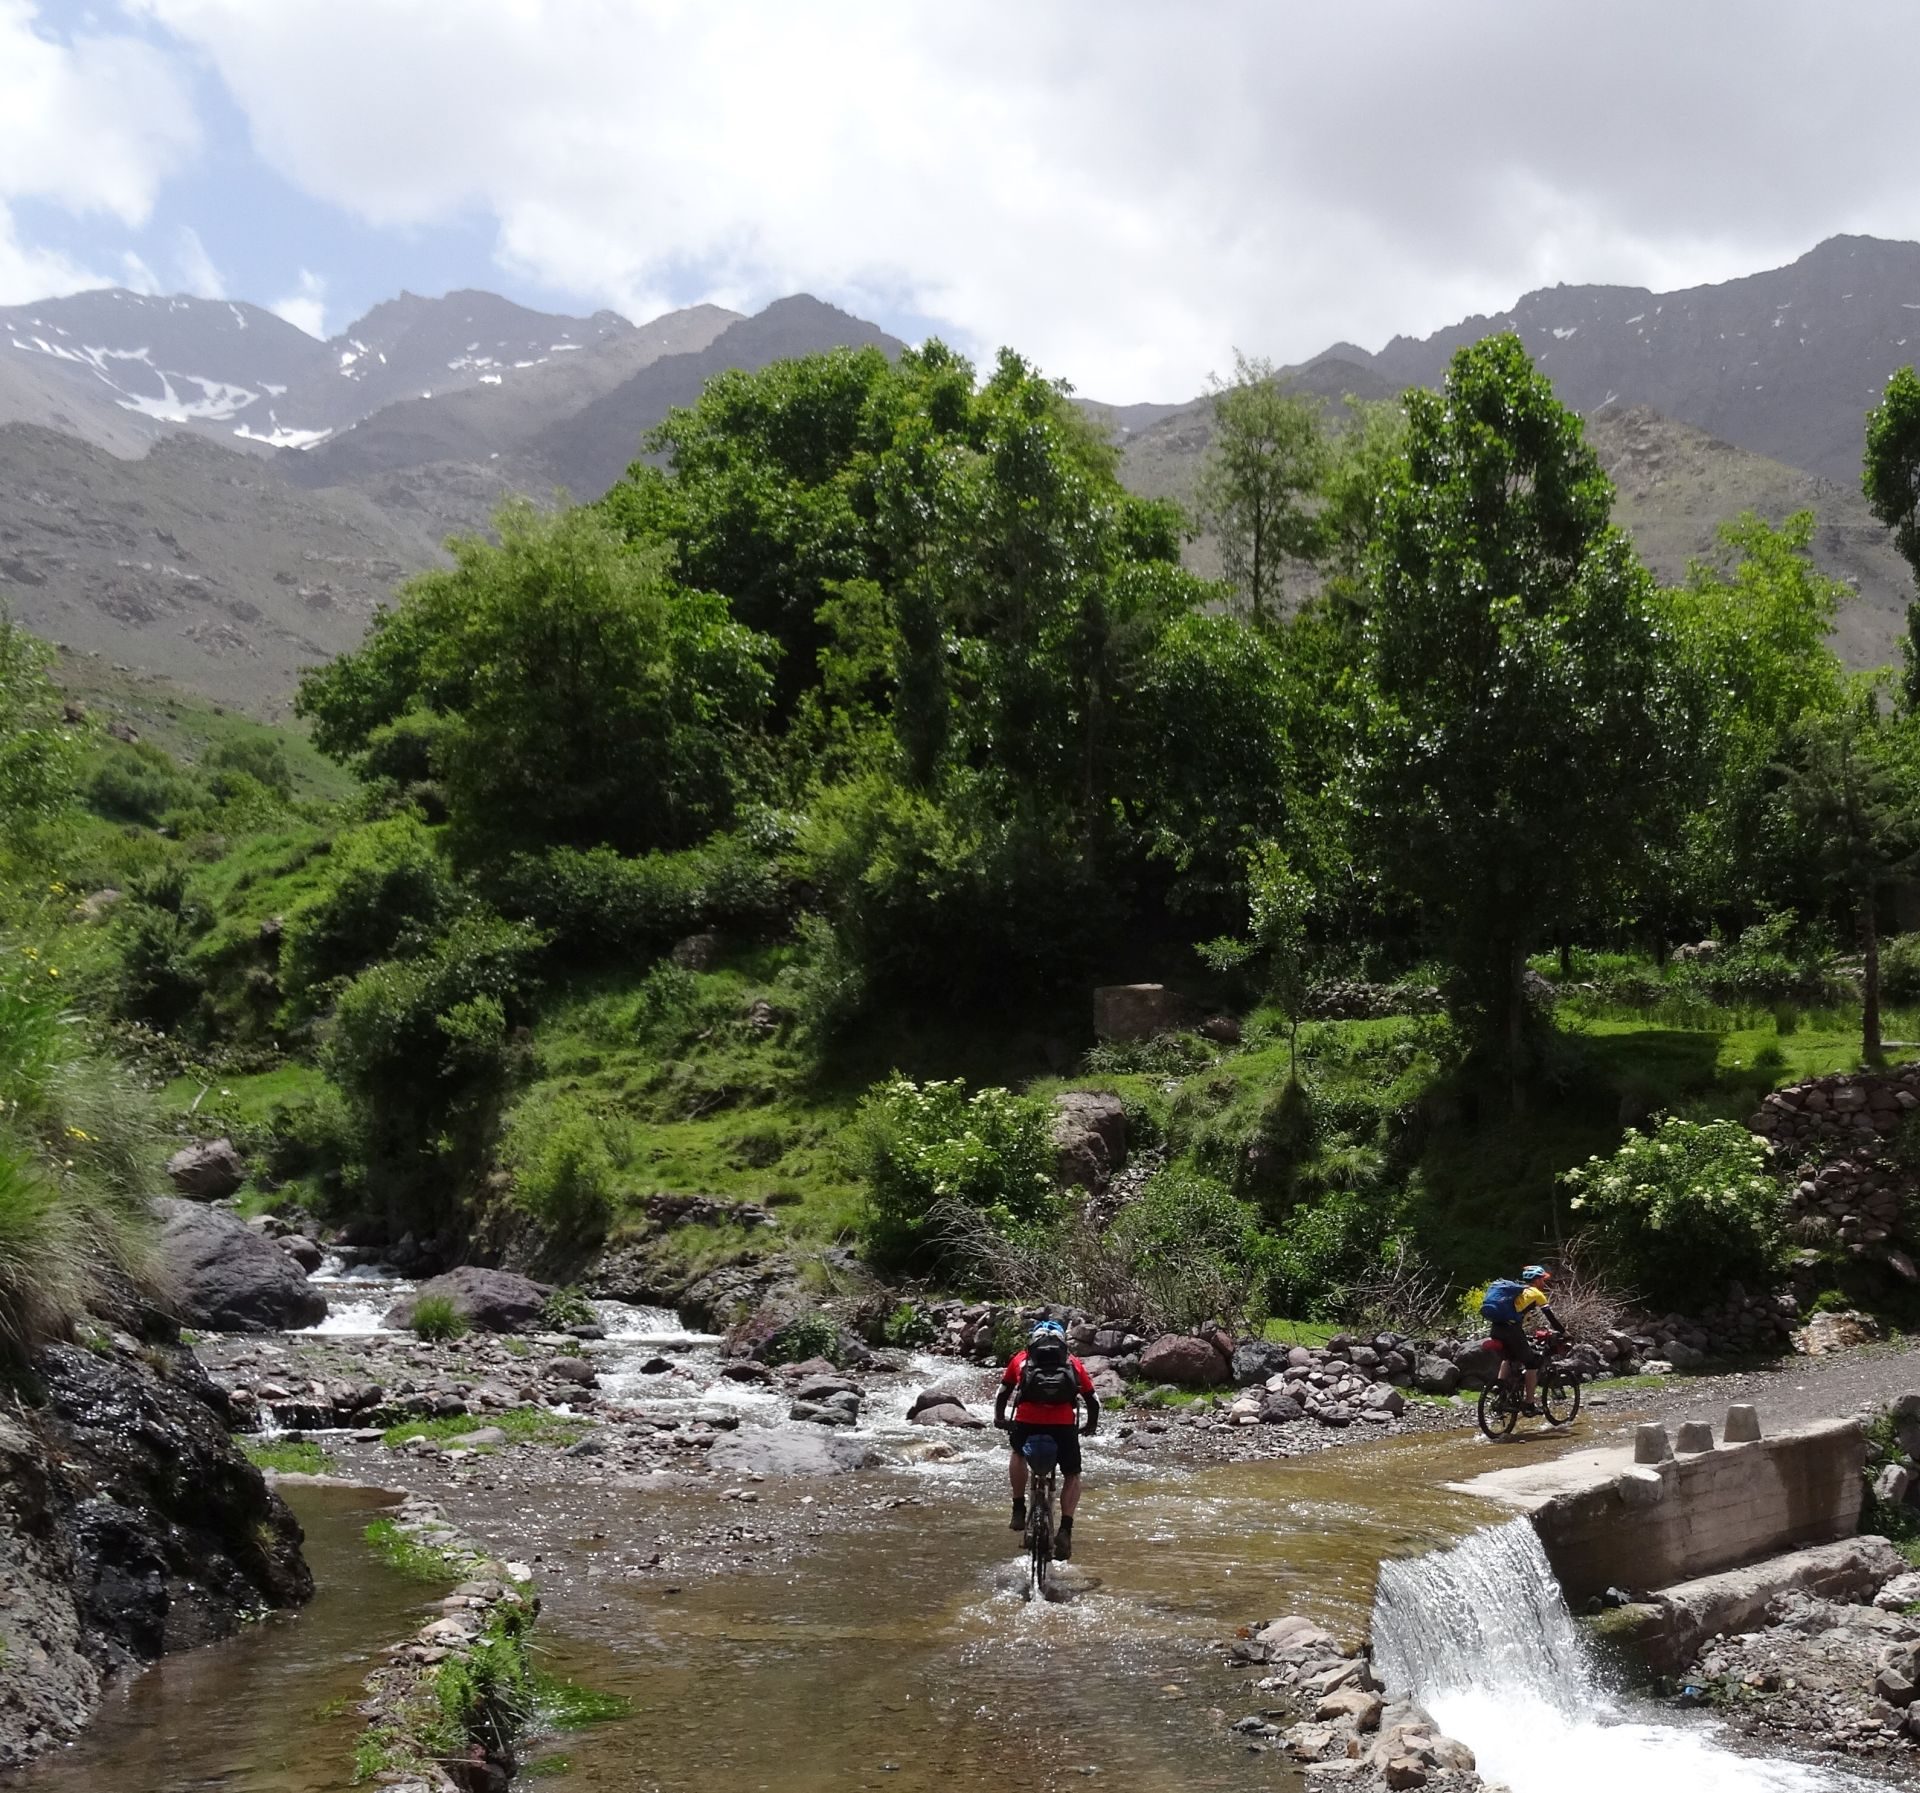 Day 8 - Splish Splash Splosh, & nearly Bish Bash Bosh! Wheel dip in the Assif Imenane river, leaving Tizi-n-Tacheddirt, en route to Imlil, before our final day of riding, tomorrow. Bou Iguenouane (12,736 ft) on left, Jbel Aksoual (12,828 ft) right - form part of a 10-mile ridge traverse for another time! © Steve Woodward